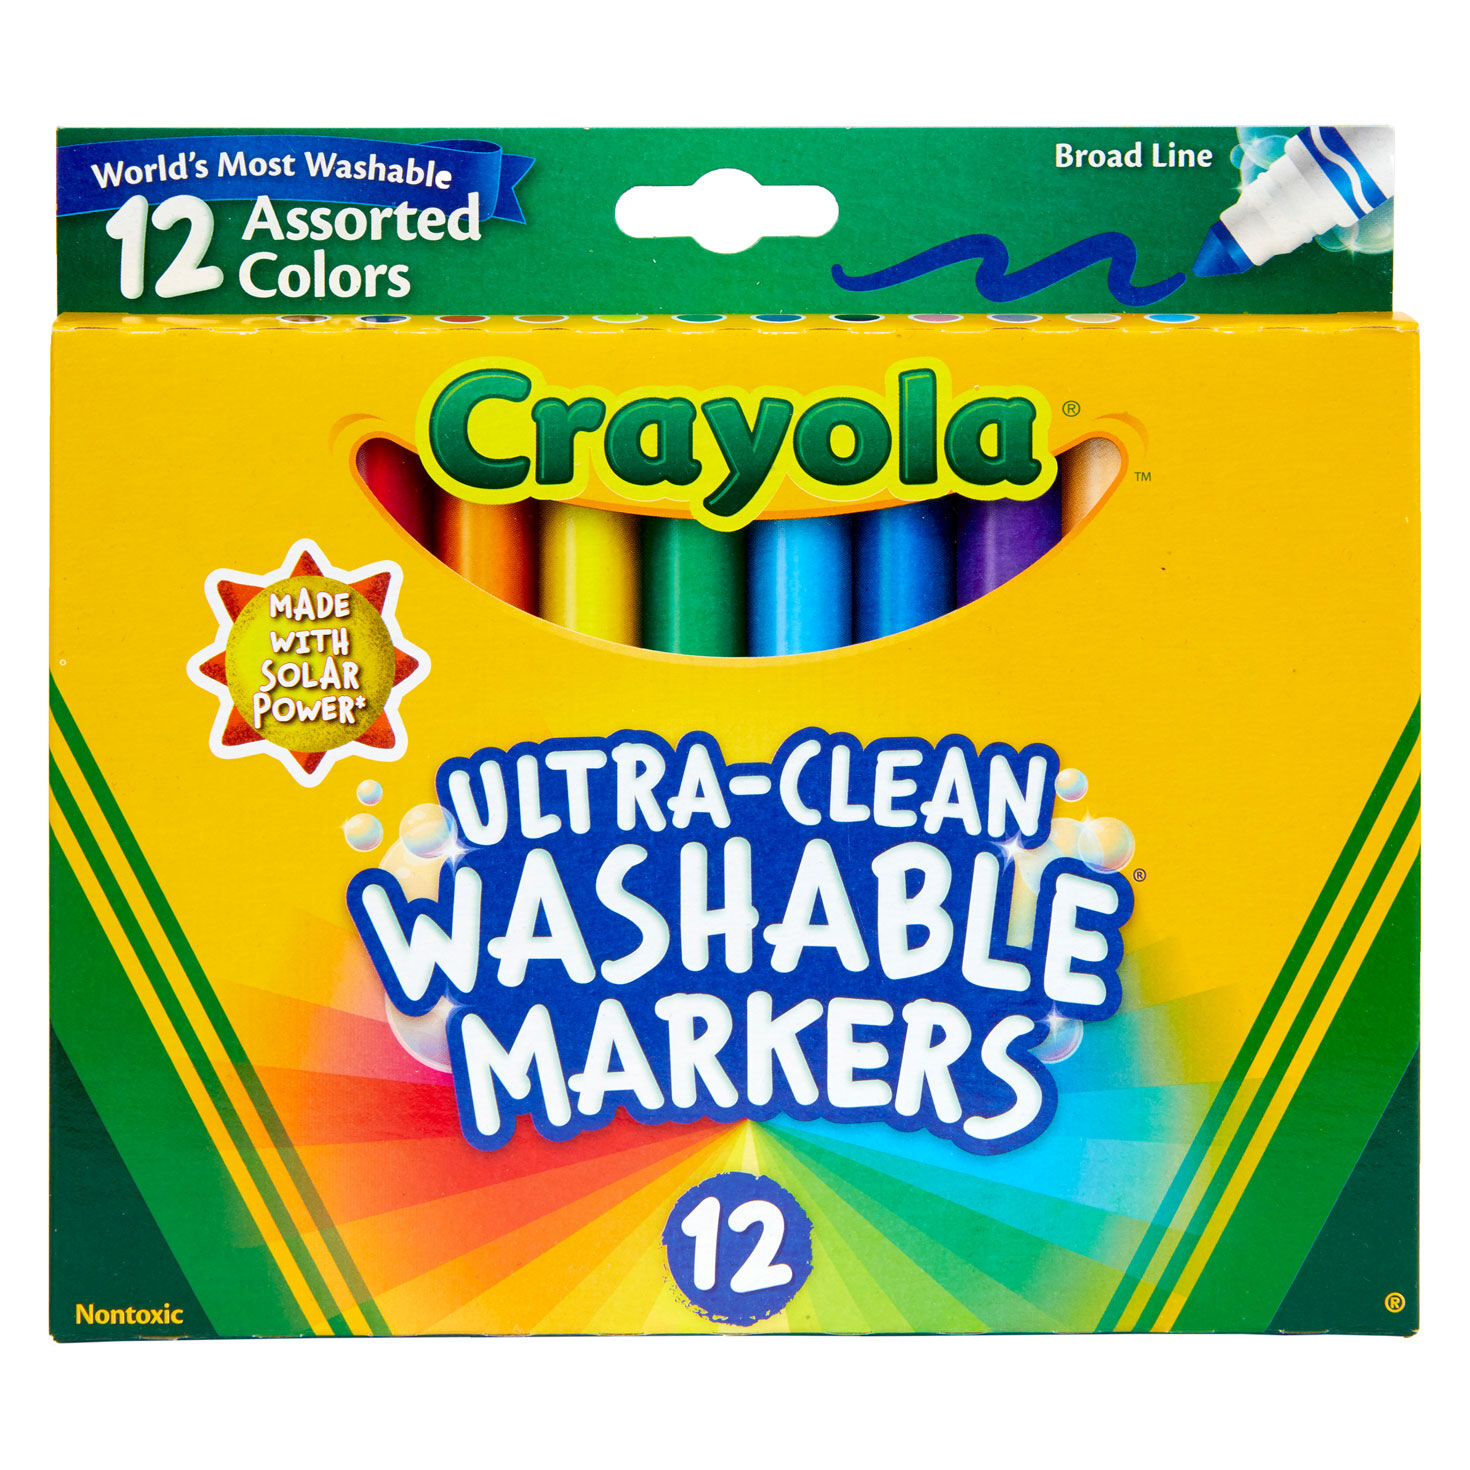 Crayola Fine Line Markers 10 Long Lasting Brilliant Colors A52-2